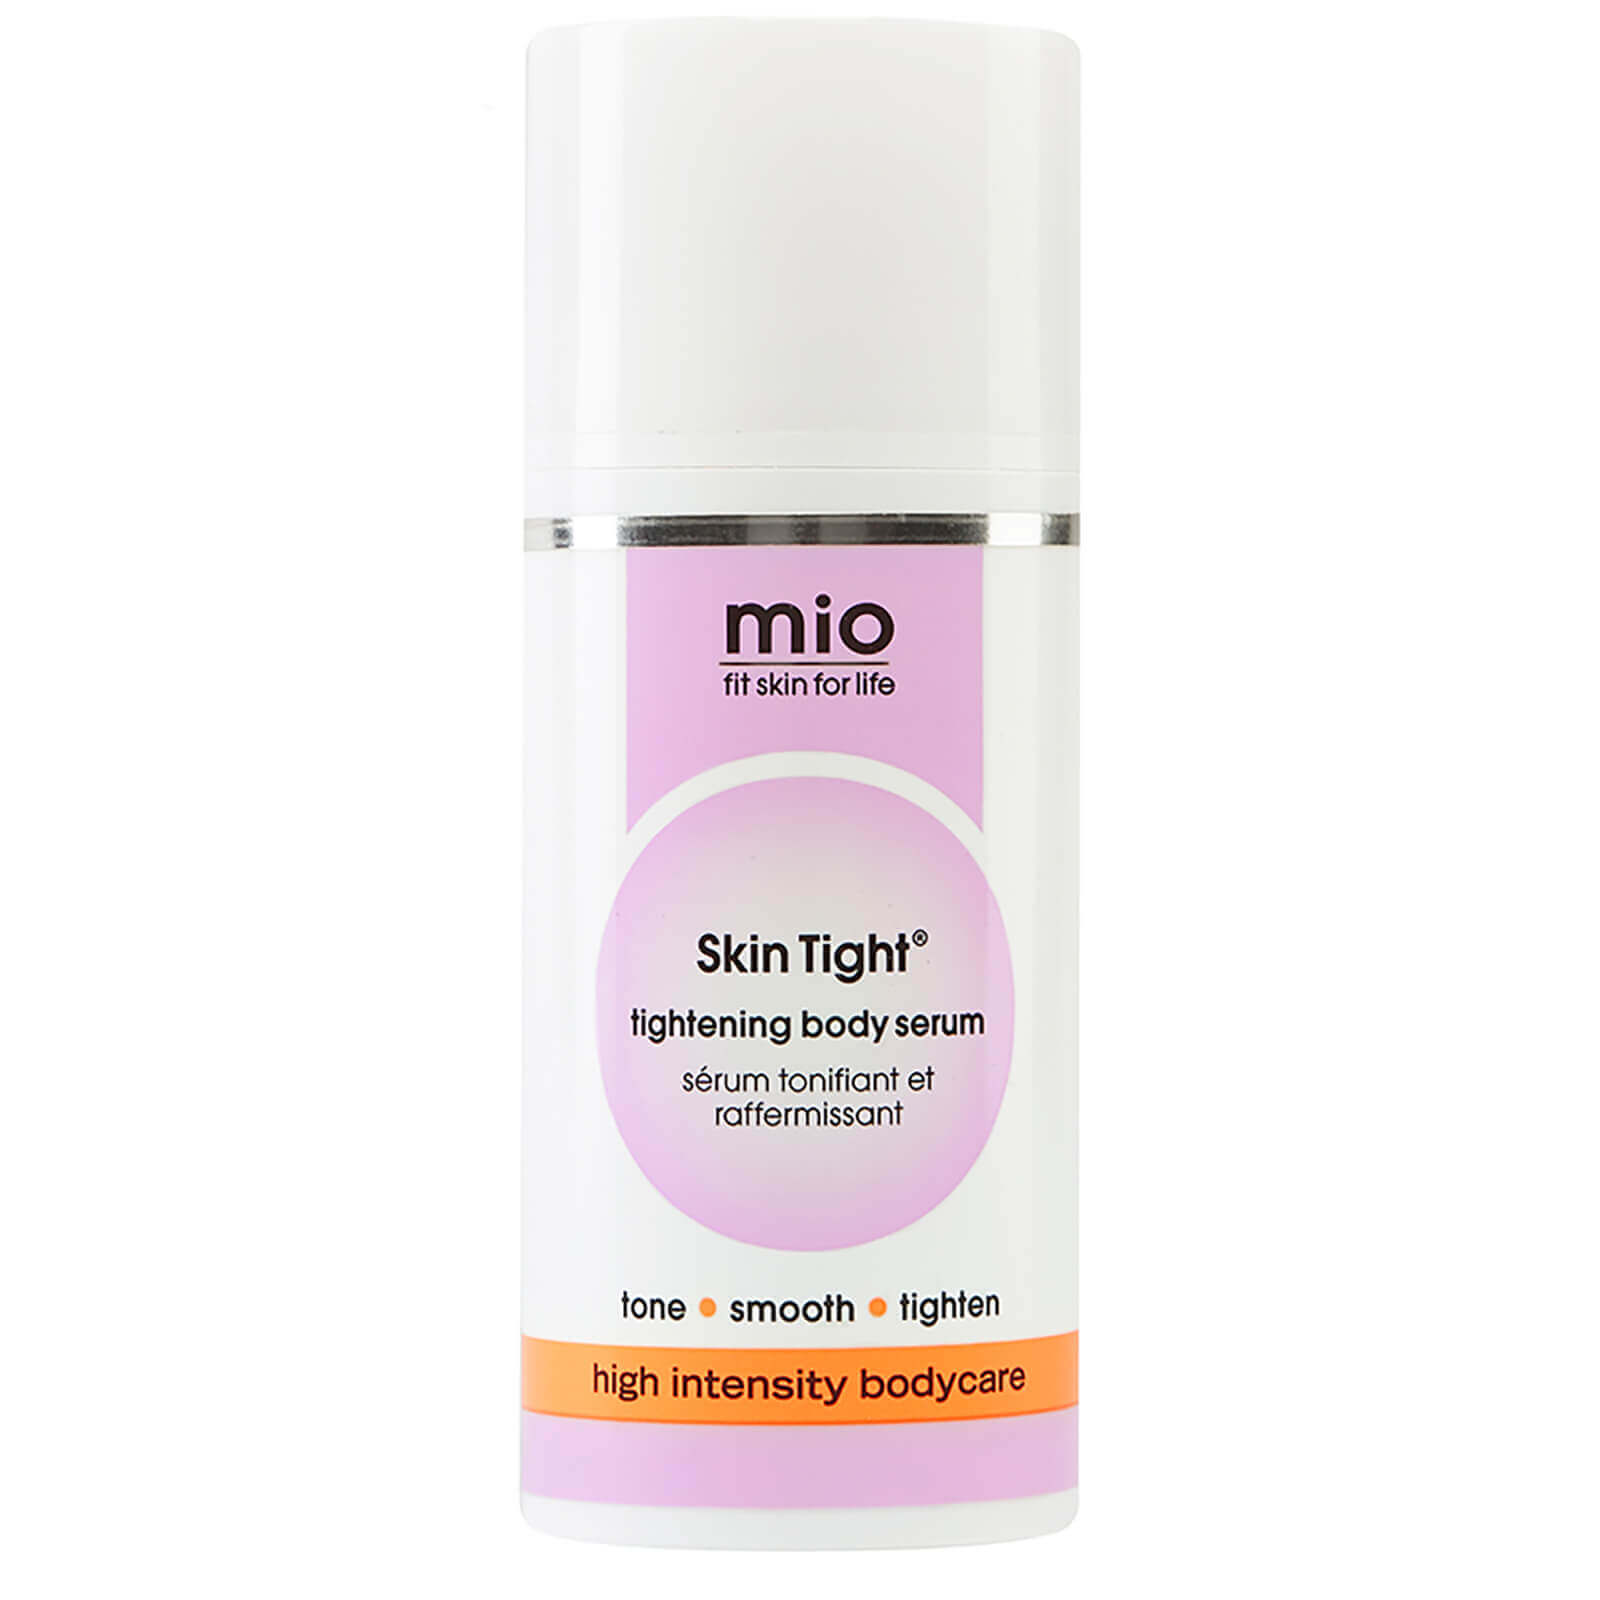 mio skincare: 20% OFF Your First Order